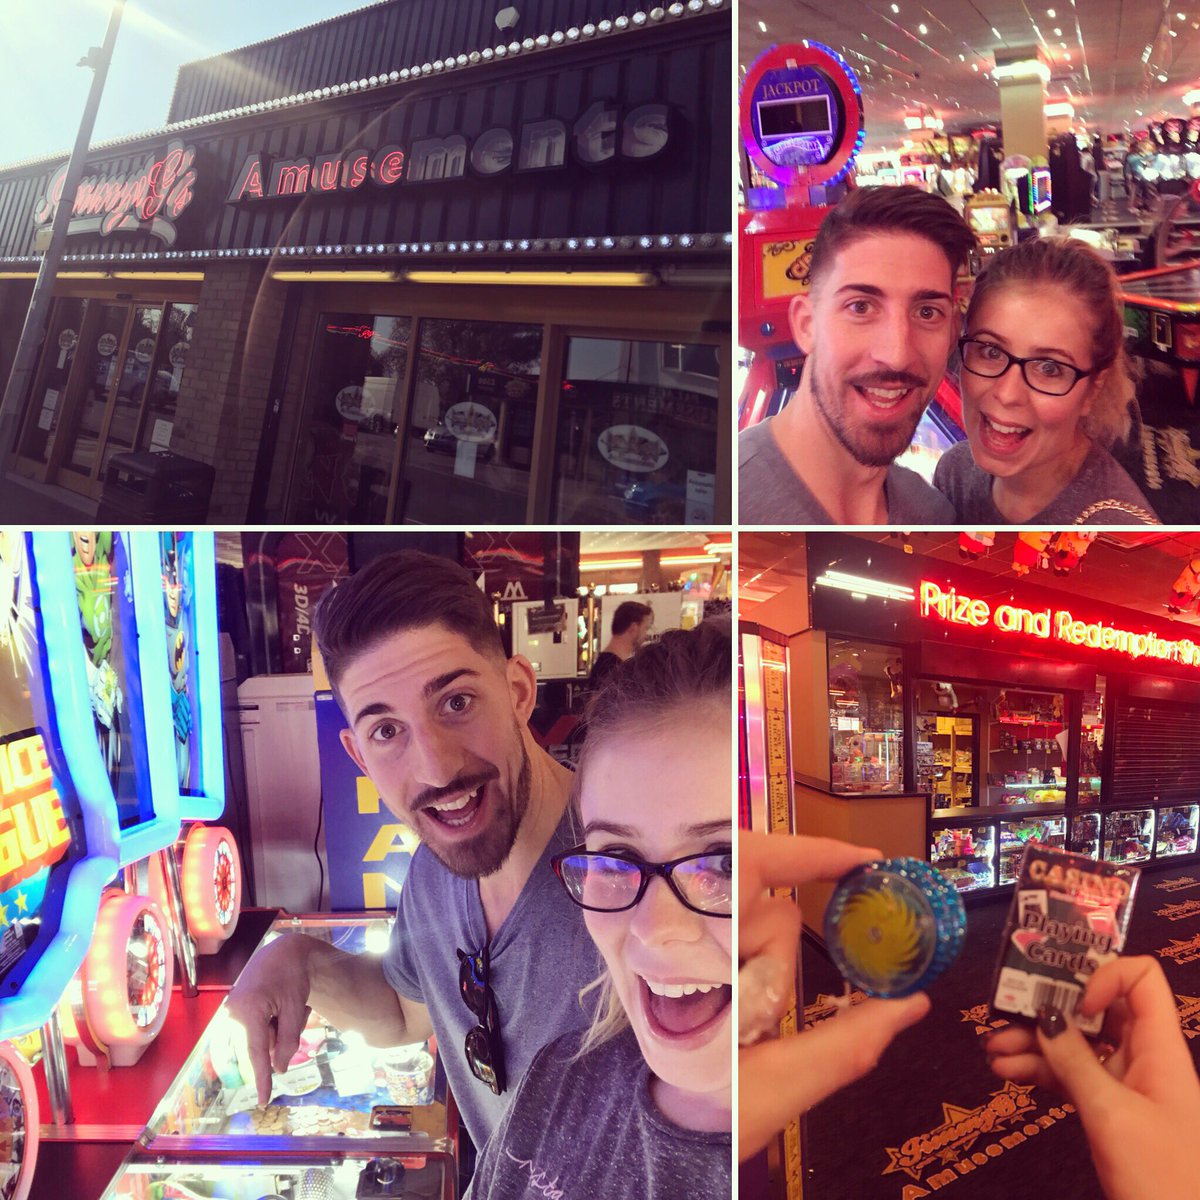 Loved our first date for #AlphabetDating. A is for Amusement Arcade! 🎮🎰🎲